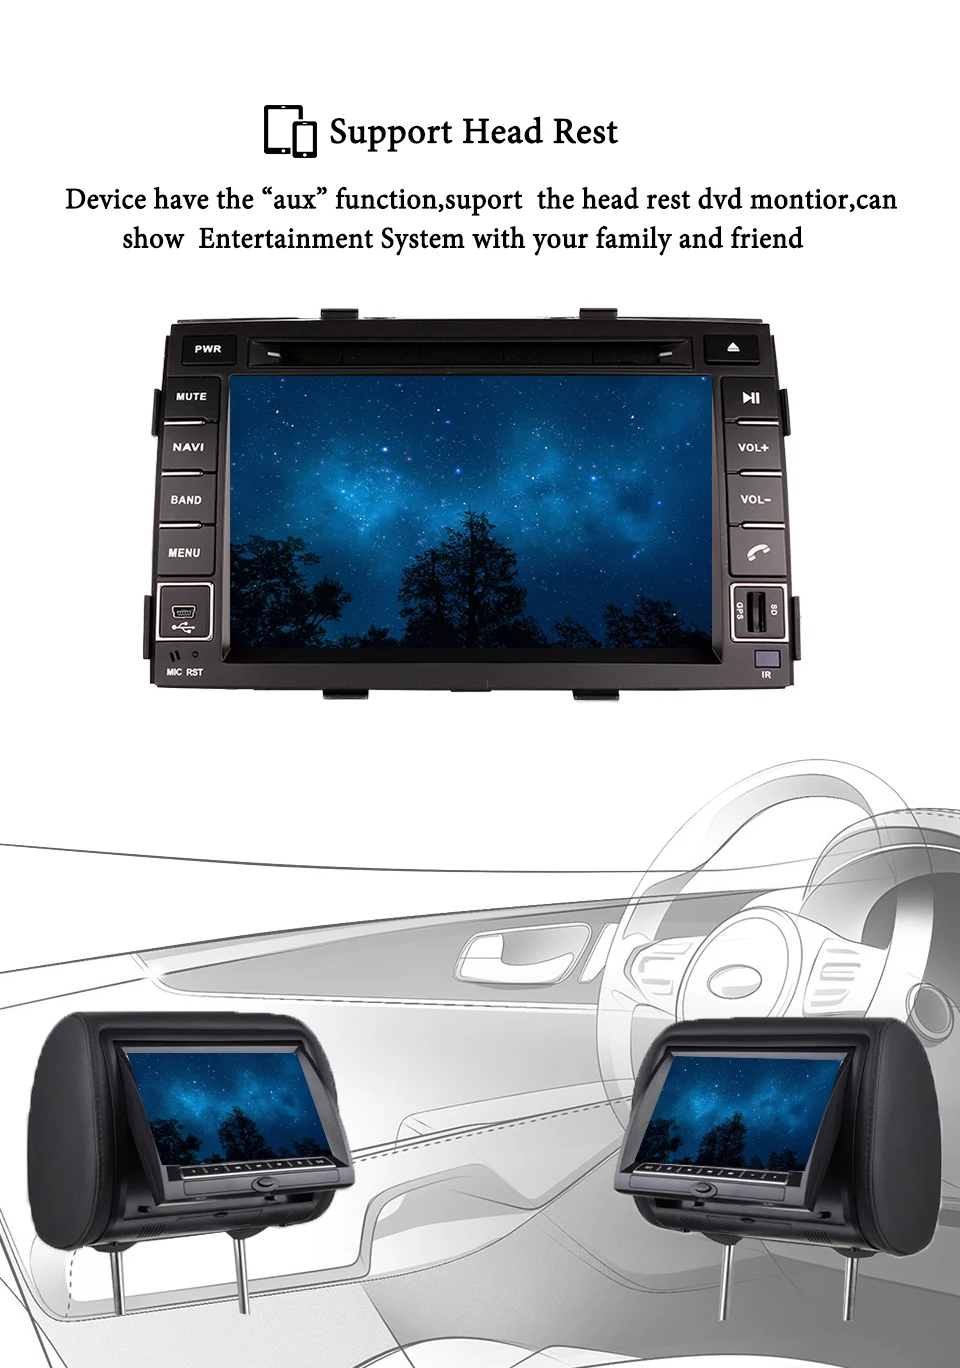 Flash Deal 8 Core Android 9.0 4G Ram 64G Car DVD player For KIA Sorento 2009 2010 2011 2012 Bluetooth DAB+ OBD TV MAp GPS navigation System 12